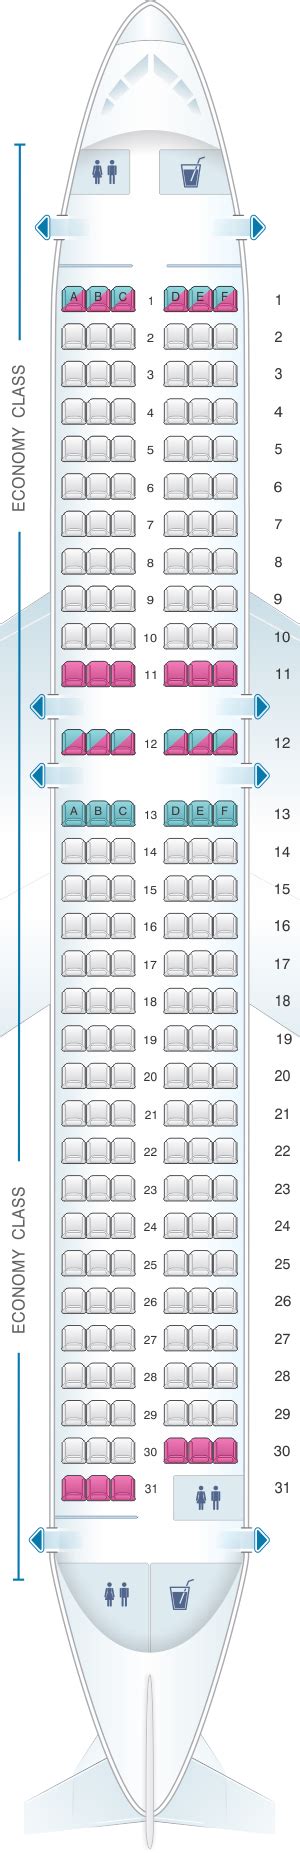 Seat Map Easyjet Airbus A320